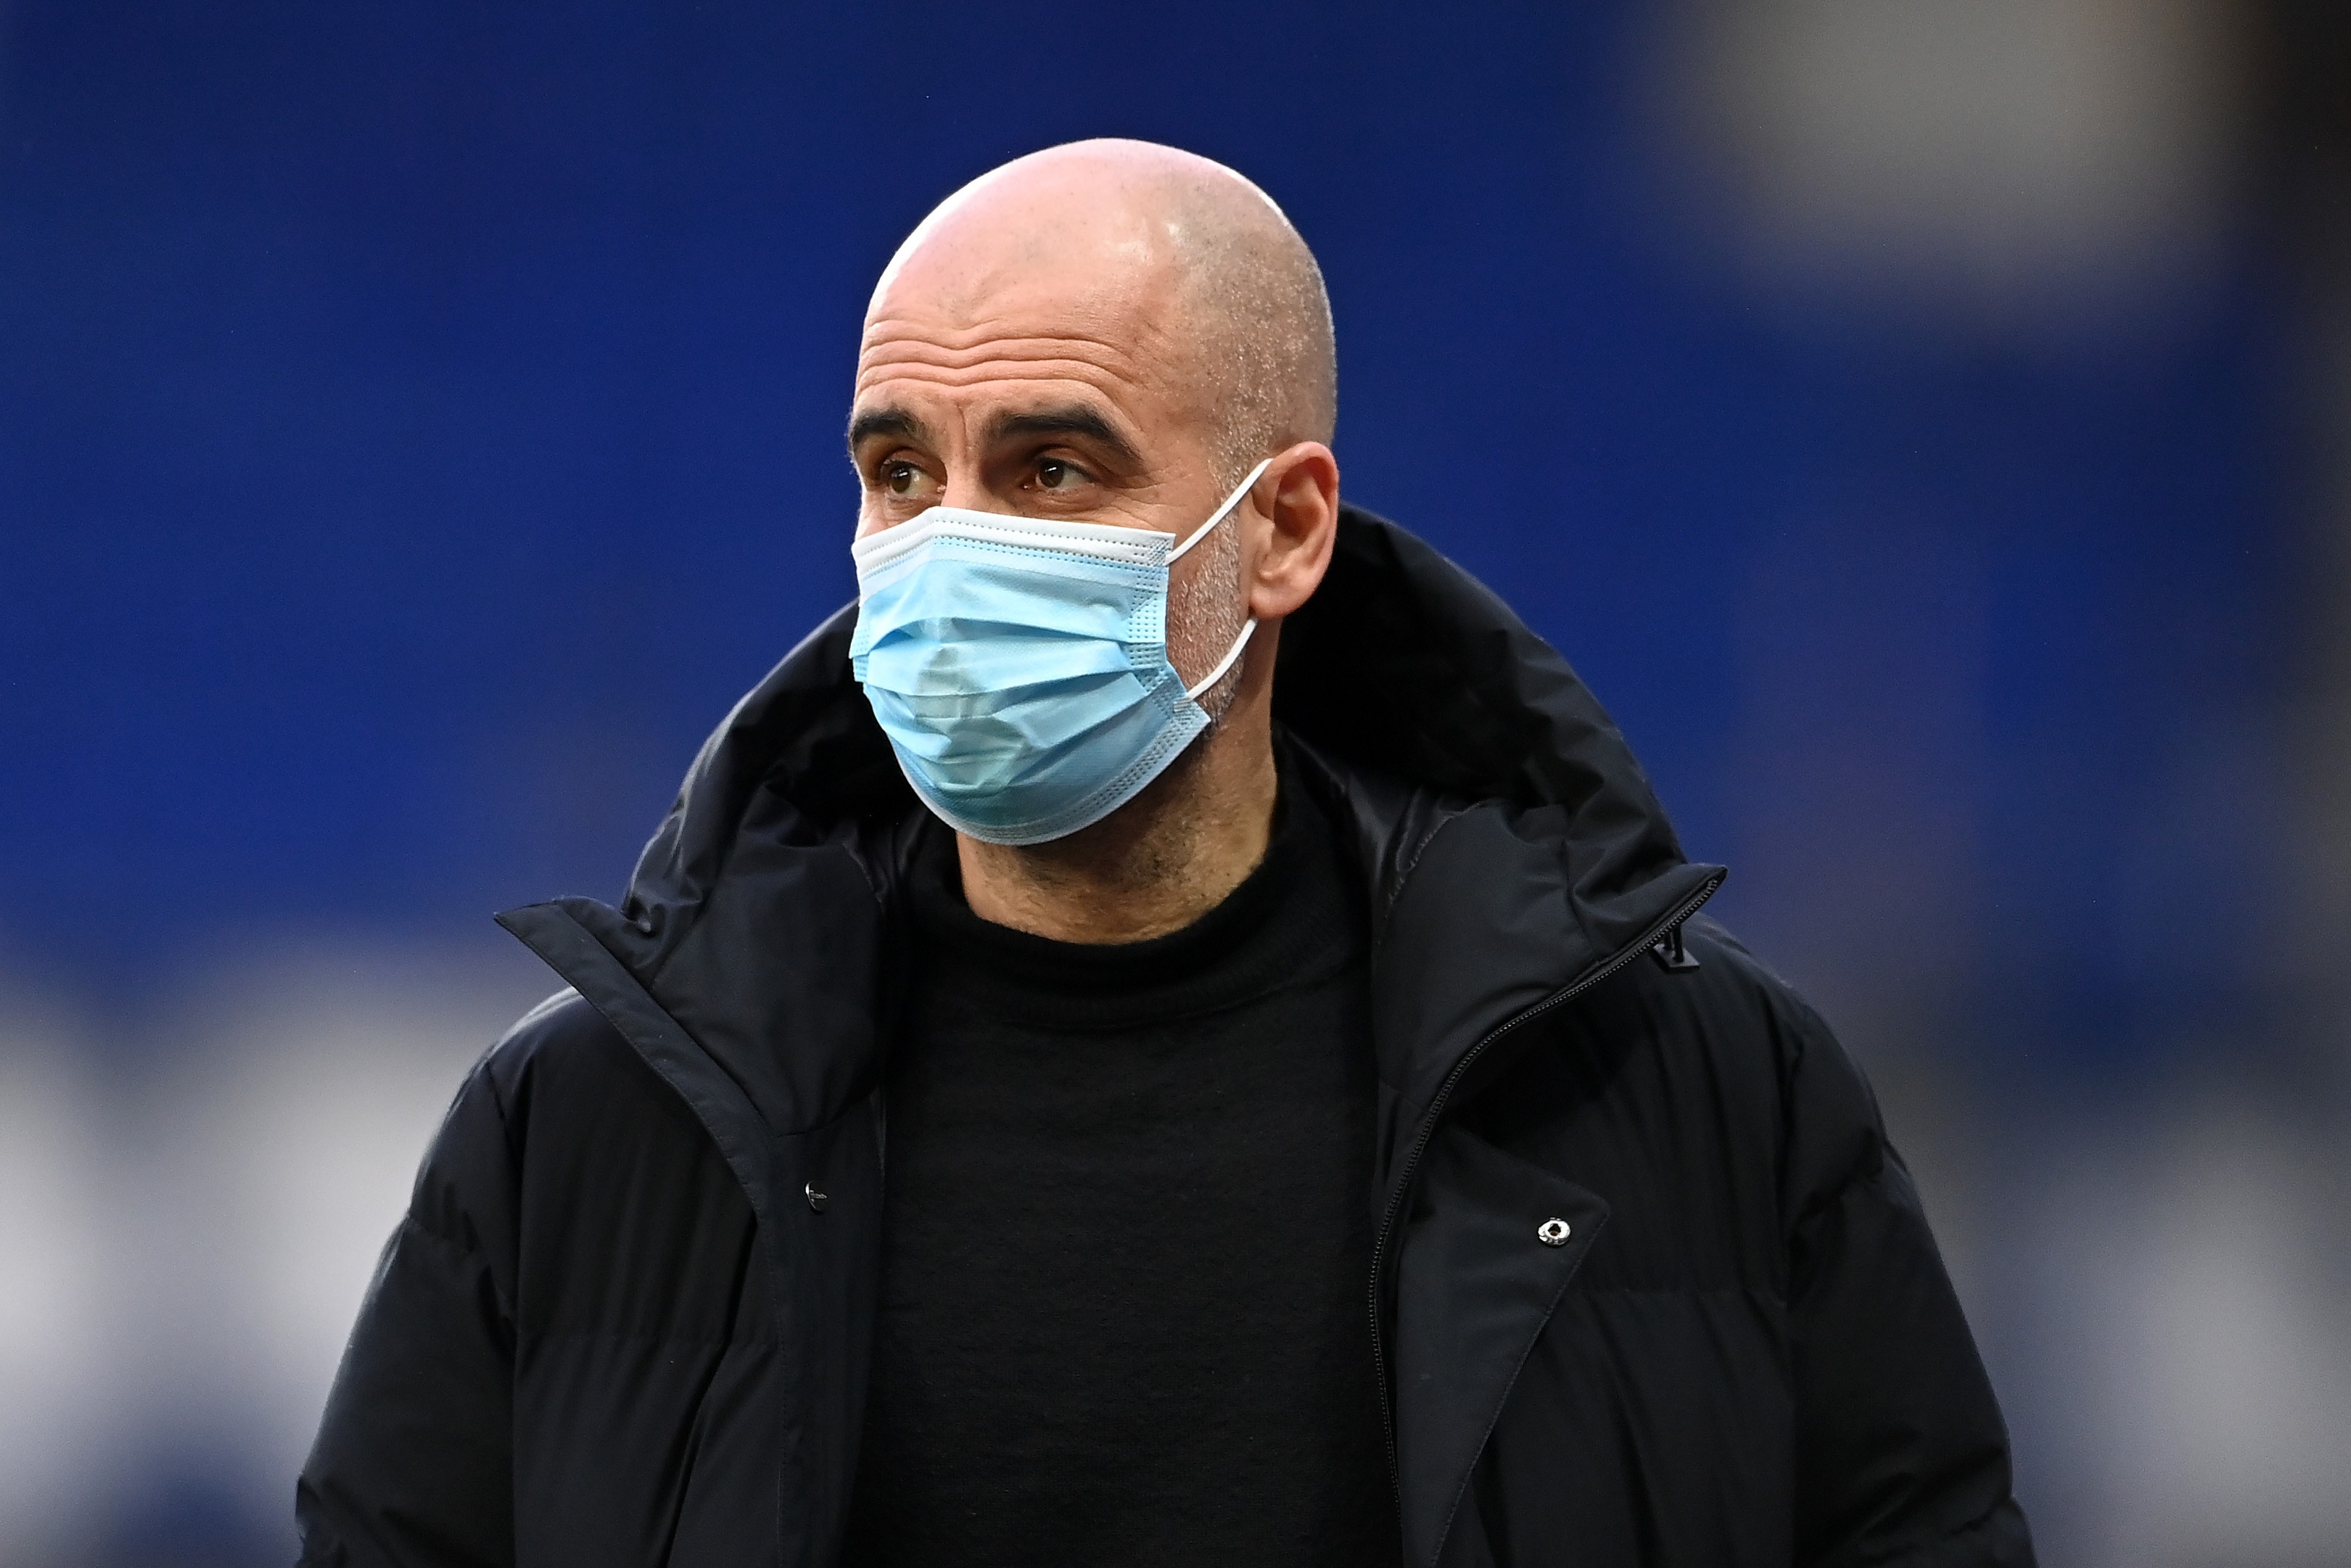 LIVERPOOL, ENGLAND - MARCH 20: Pep Guardiola, Manager of Manchester City is seen wearing a facemask prior to  The Emirates FA Cup Quarter Final match between Everton v Manchester City at Goodison Park on March 20, 2021 in Liverpool, England. Sporting stad (Foto: The FA via Getty Images)